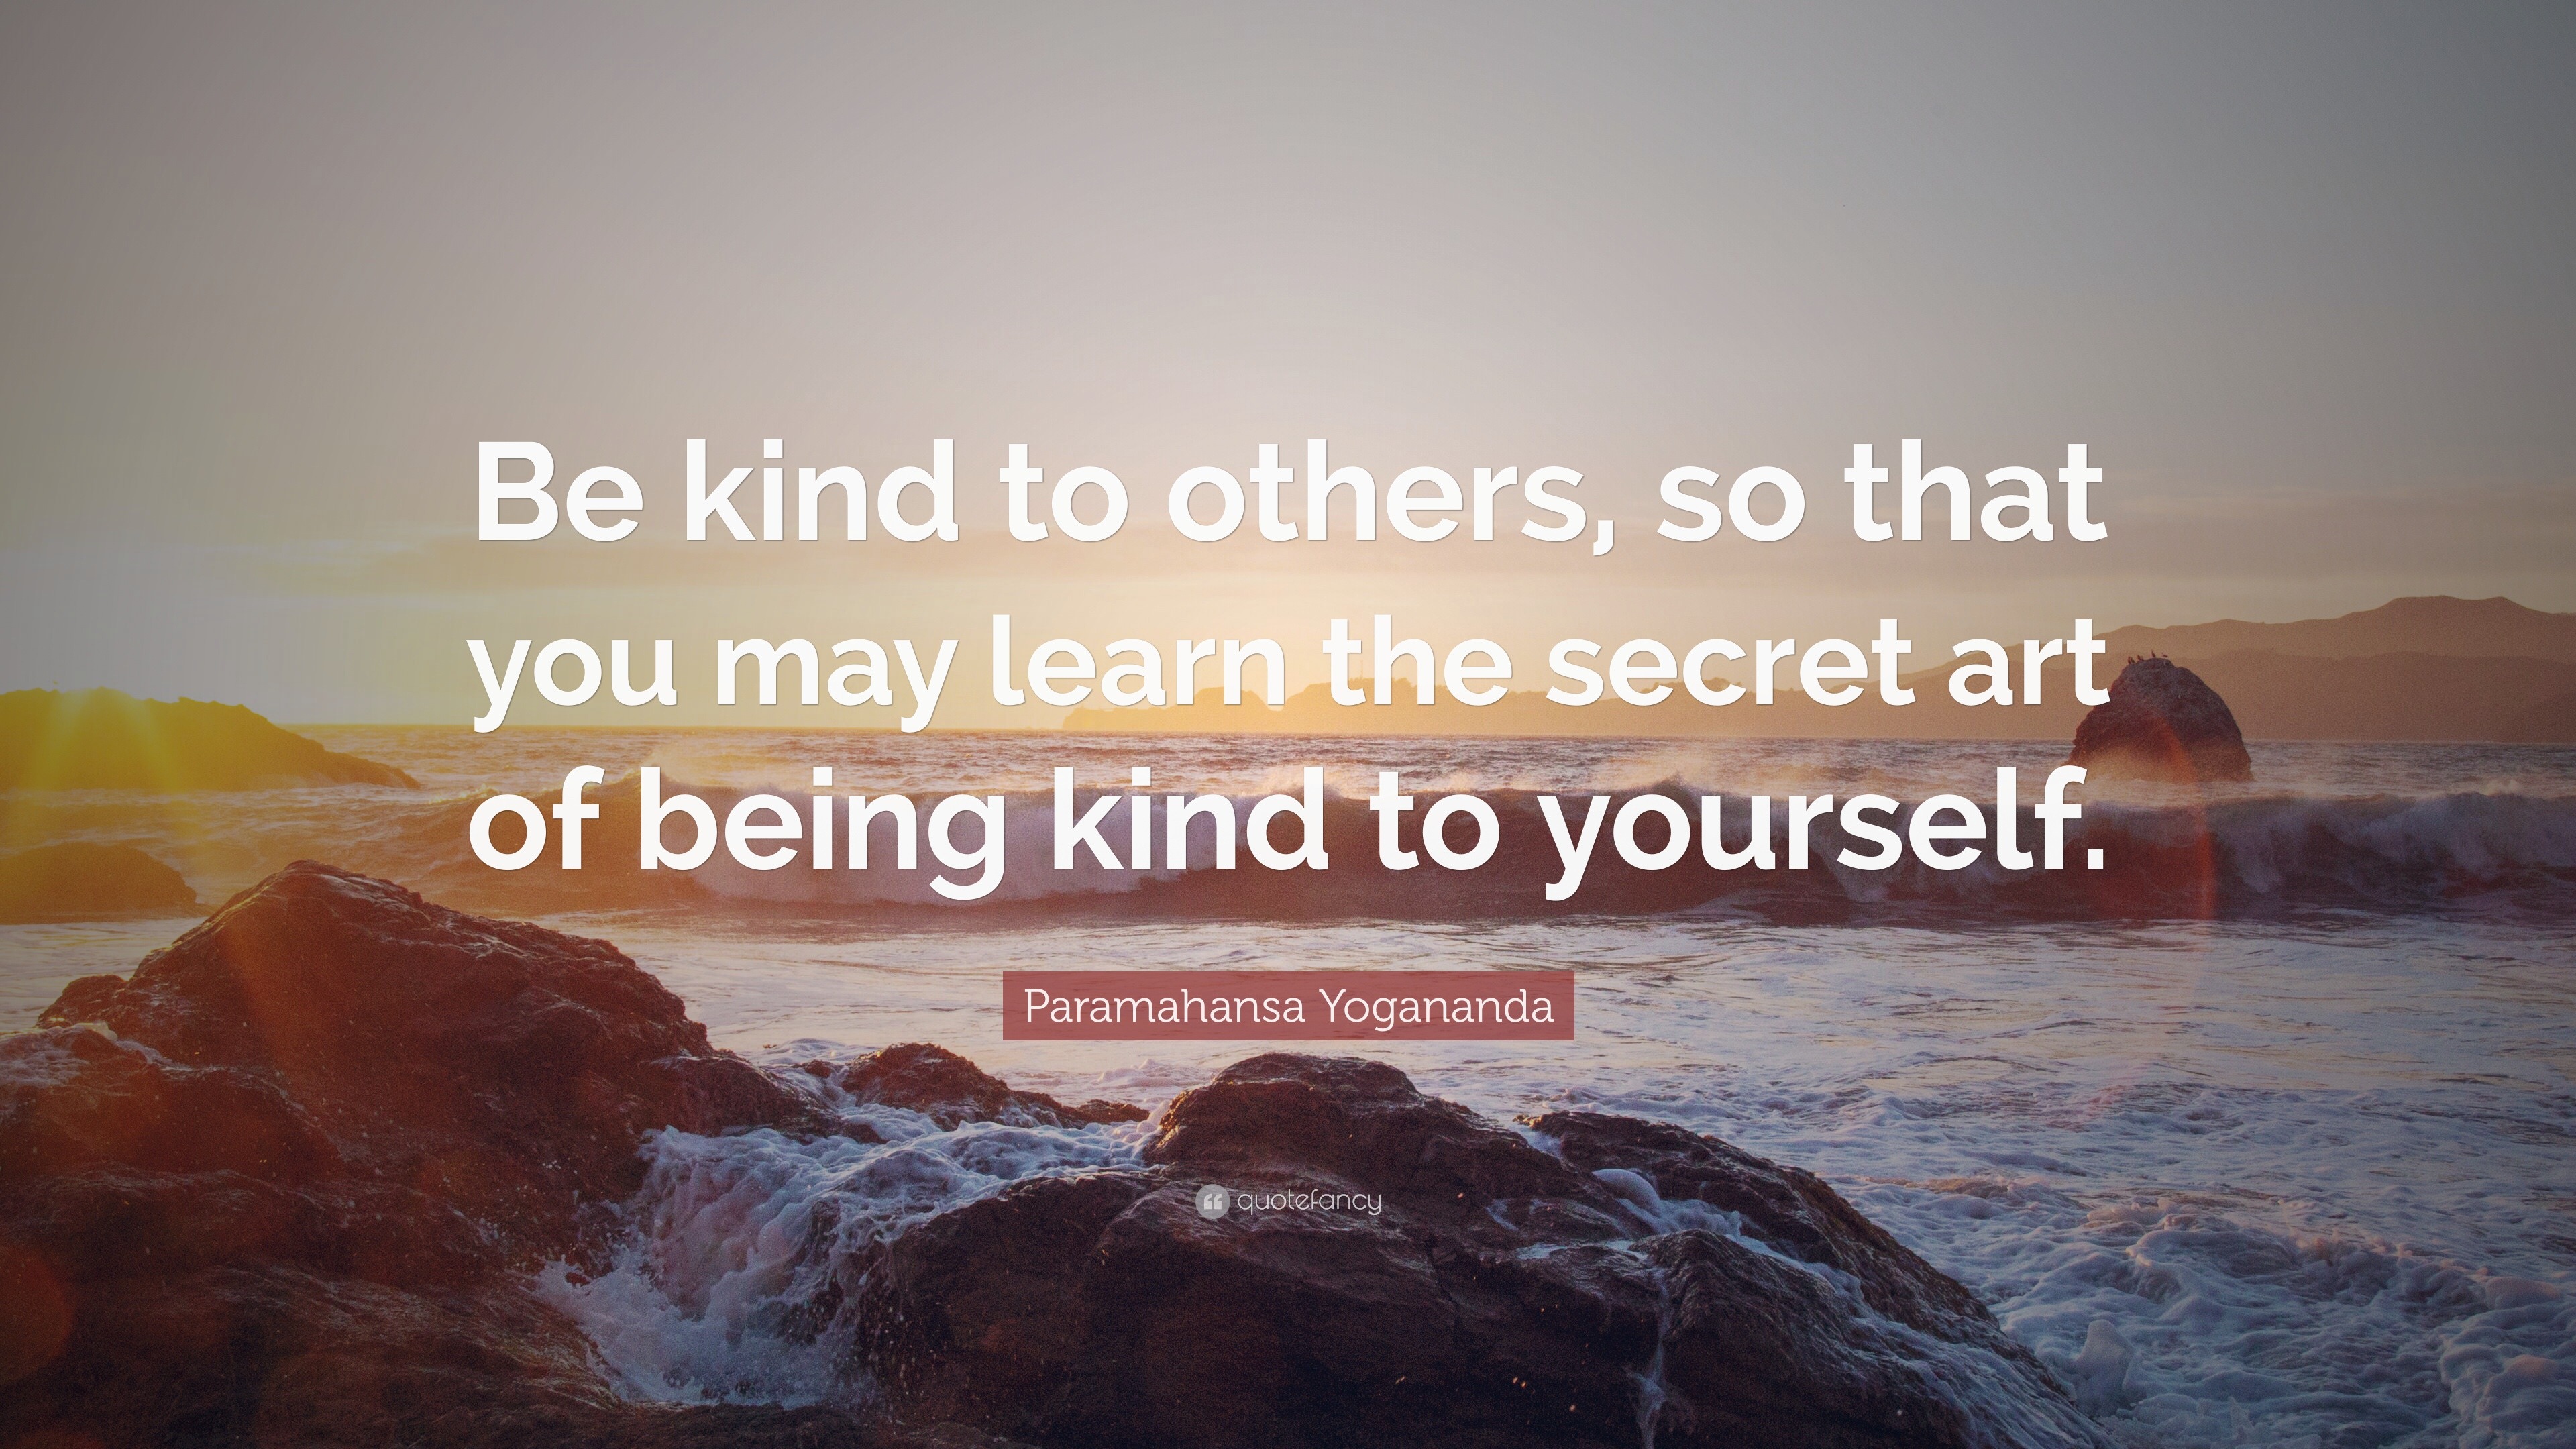 1731365 Paramahansa Yogananda Quote Be kind to others so that you may